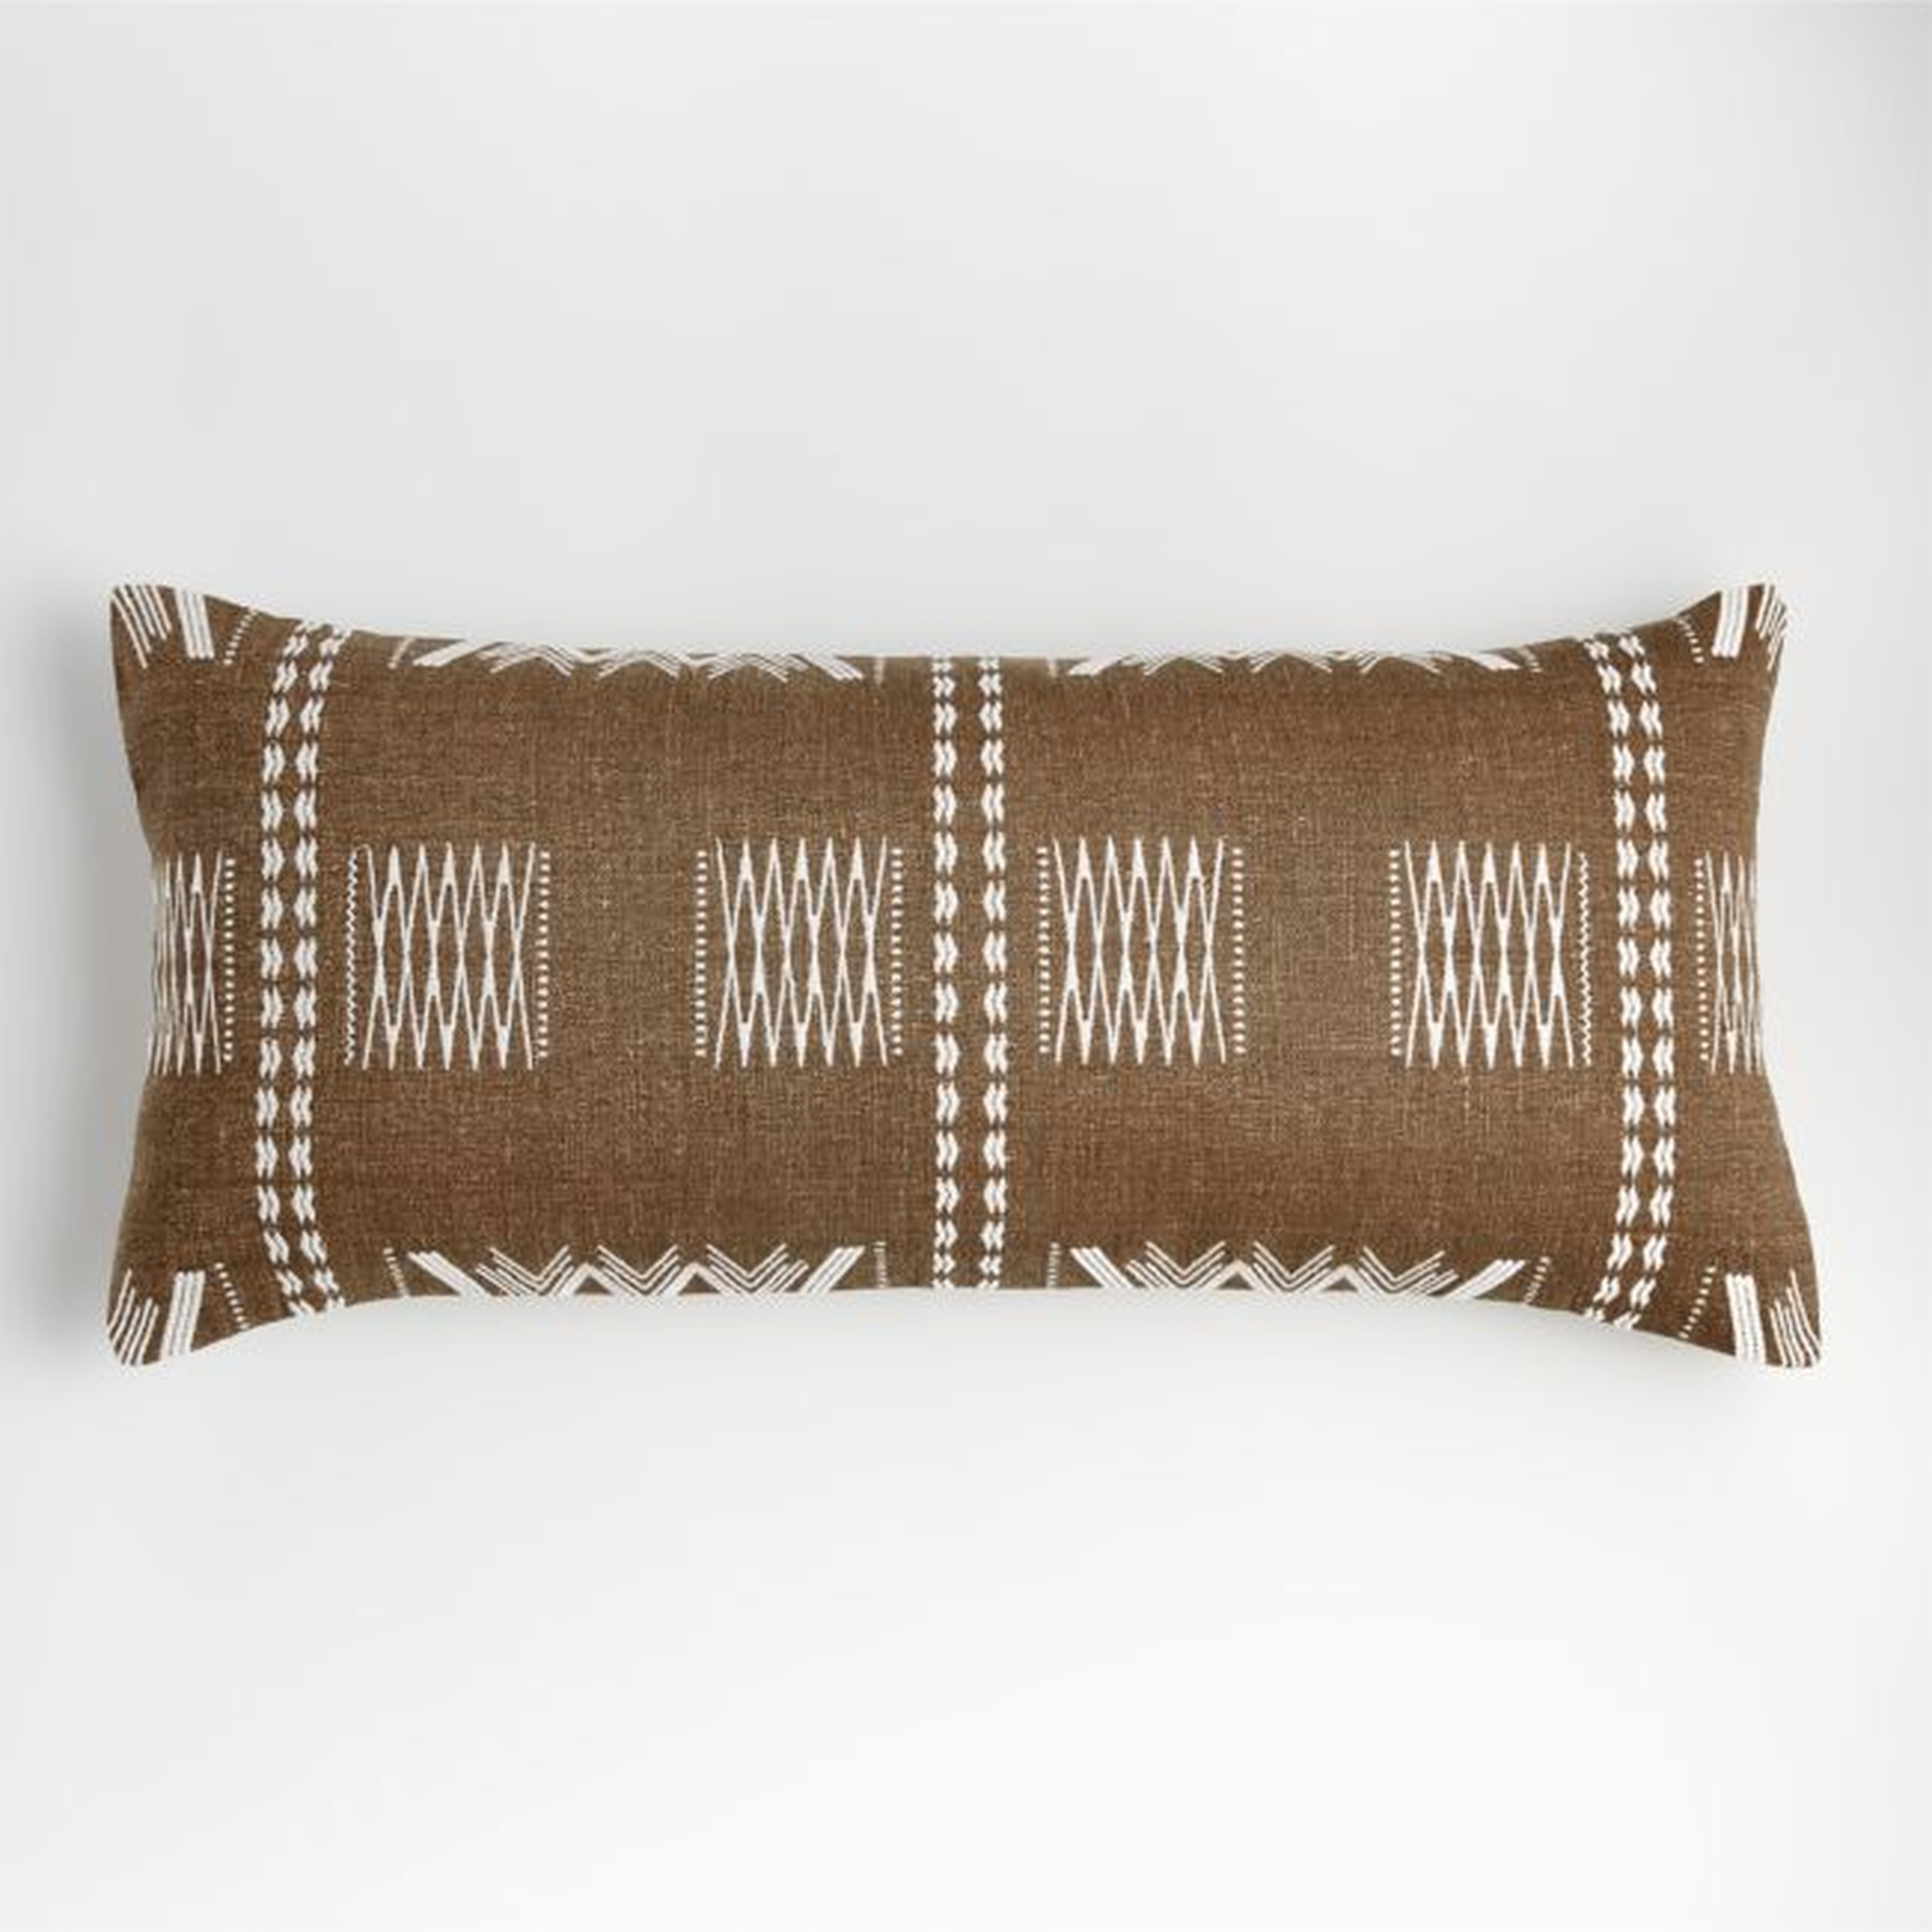 Sentul 36"x16" Olive Embroidered Throw Pillow Cover - Crate and Barrel